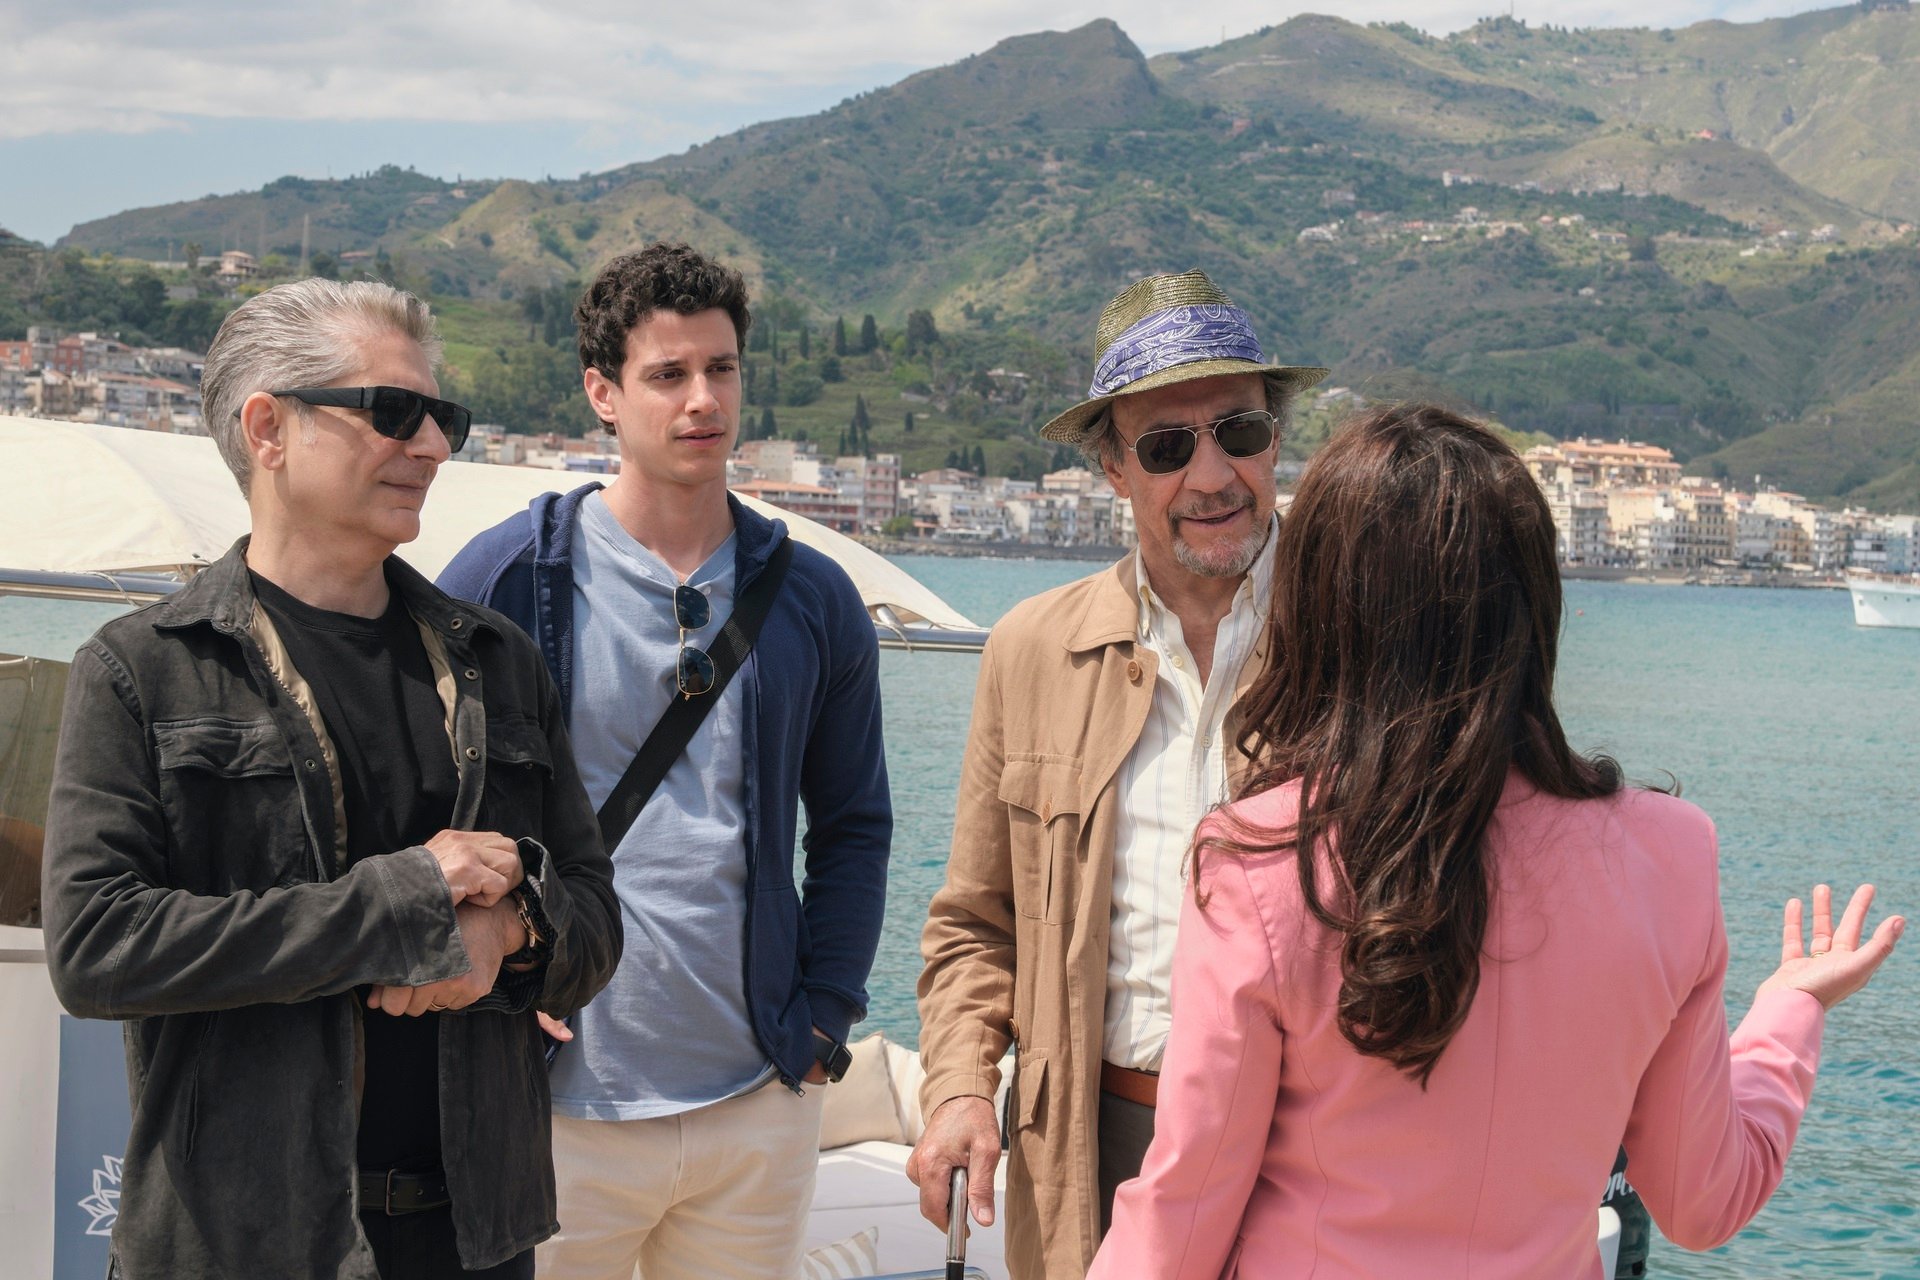 HBO's 'The White Lotus': On Location With the Cast in Sicily